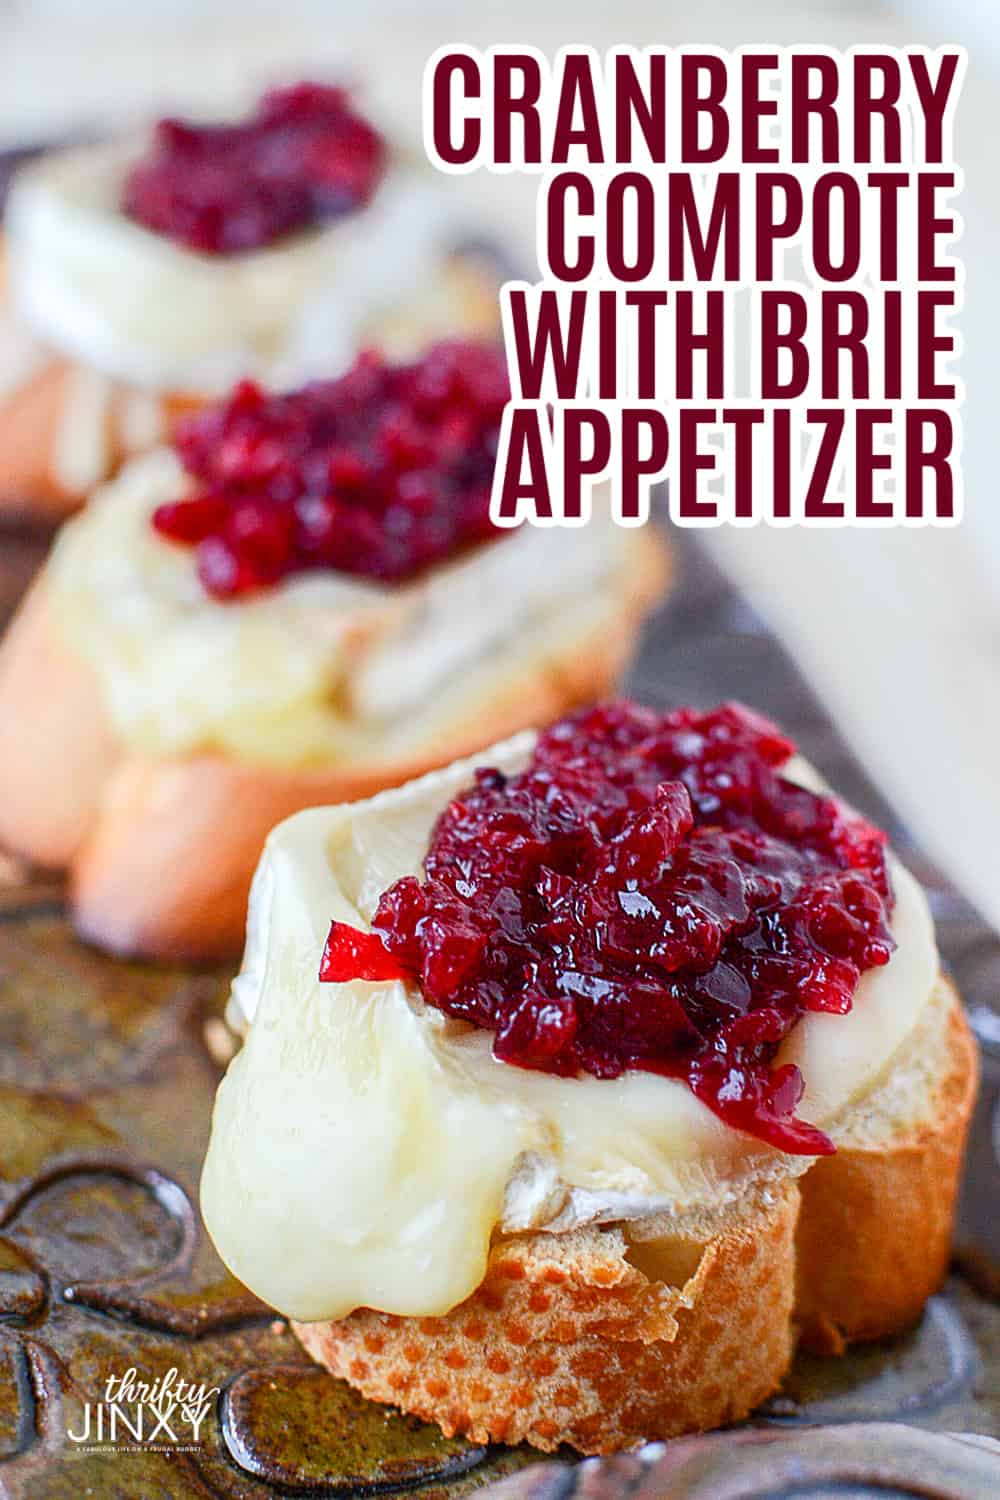 Cranberry Compote with Brie Appetizer Recipe - Thrifty Jinxy